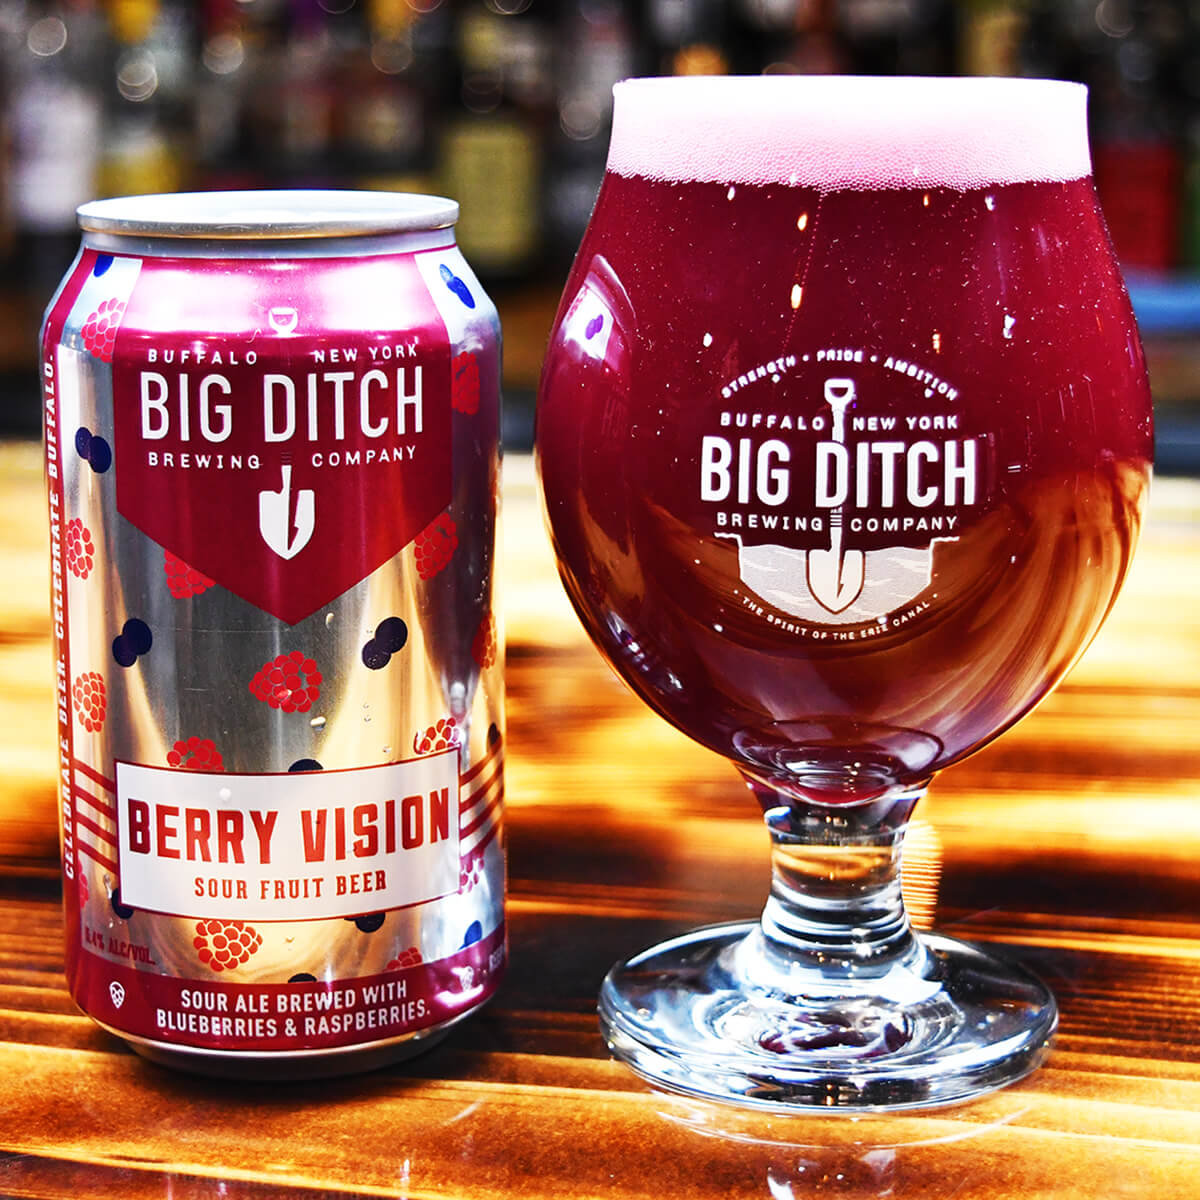 Berry Vision - Sour Fruit Beer - Big Ditch - Buffalocal